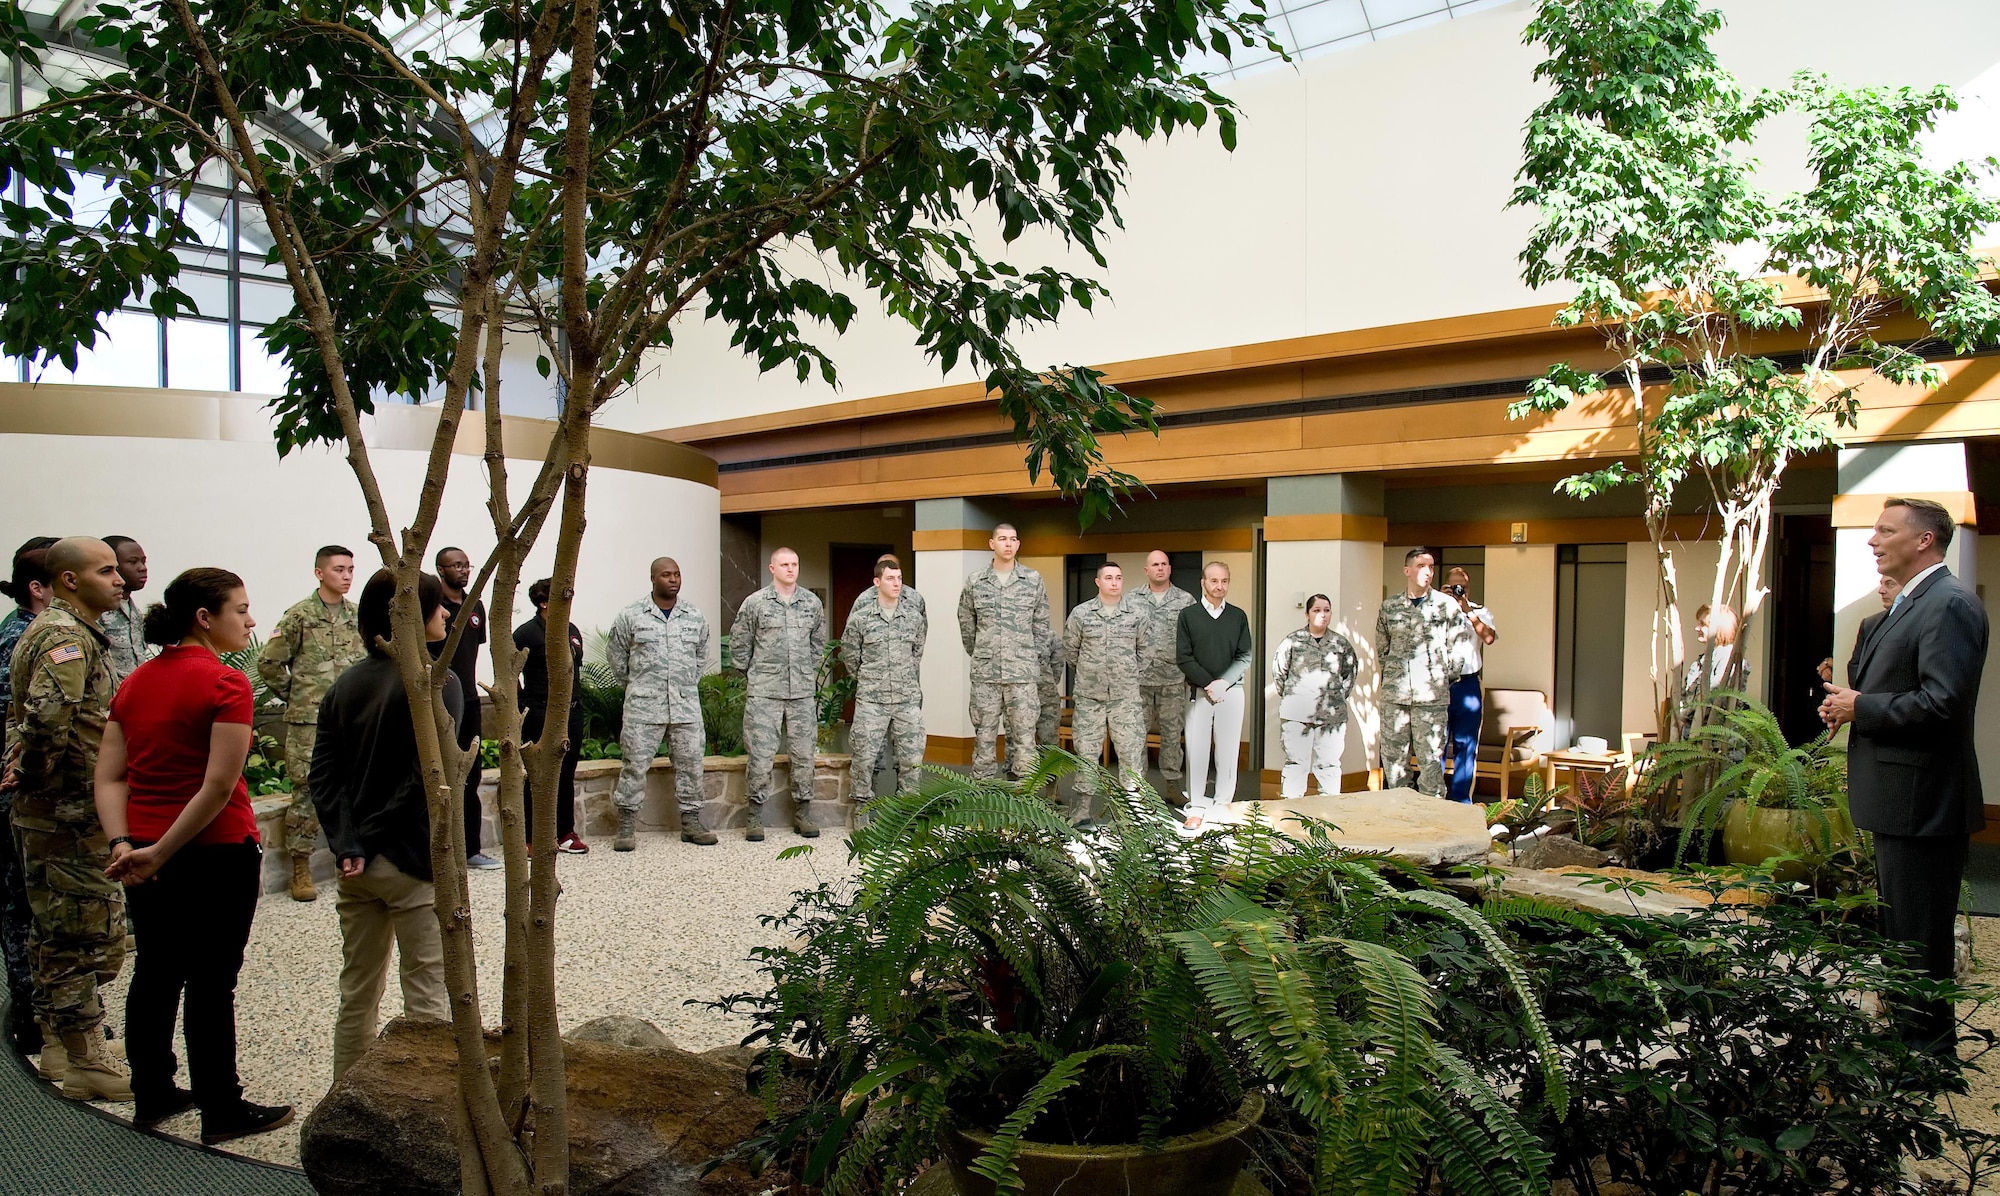 Todd Weiler, Assistant Secretary of Defense Manpower and Reserve Affairs, addresses the Air Force Mortuary Affairs Operations team in the atrium of the Charles C. Carson Center for Mortuary Affairs, at Dover Air Force Base, Del., Nov. 4, 2016. Weiler visited the mortuary as well as the Campus for the Families of the Fallen. (U.S. Air Force photo by Roland Balik)